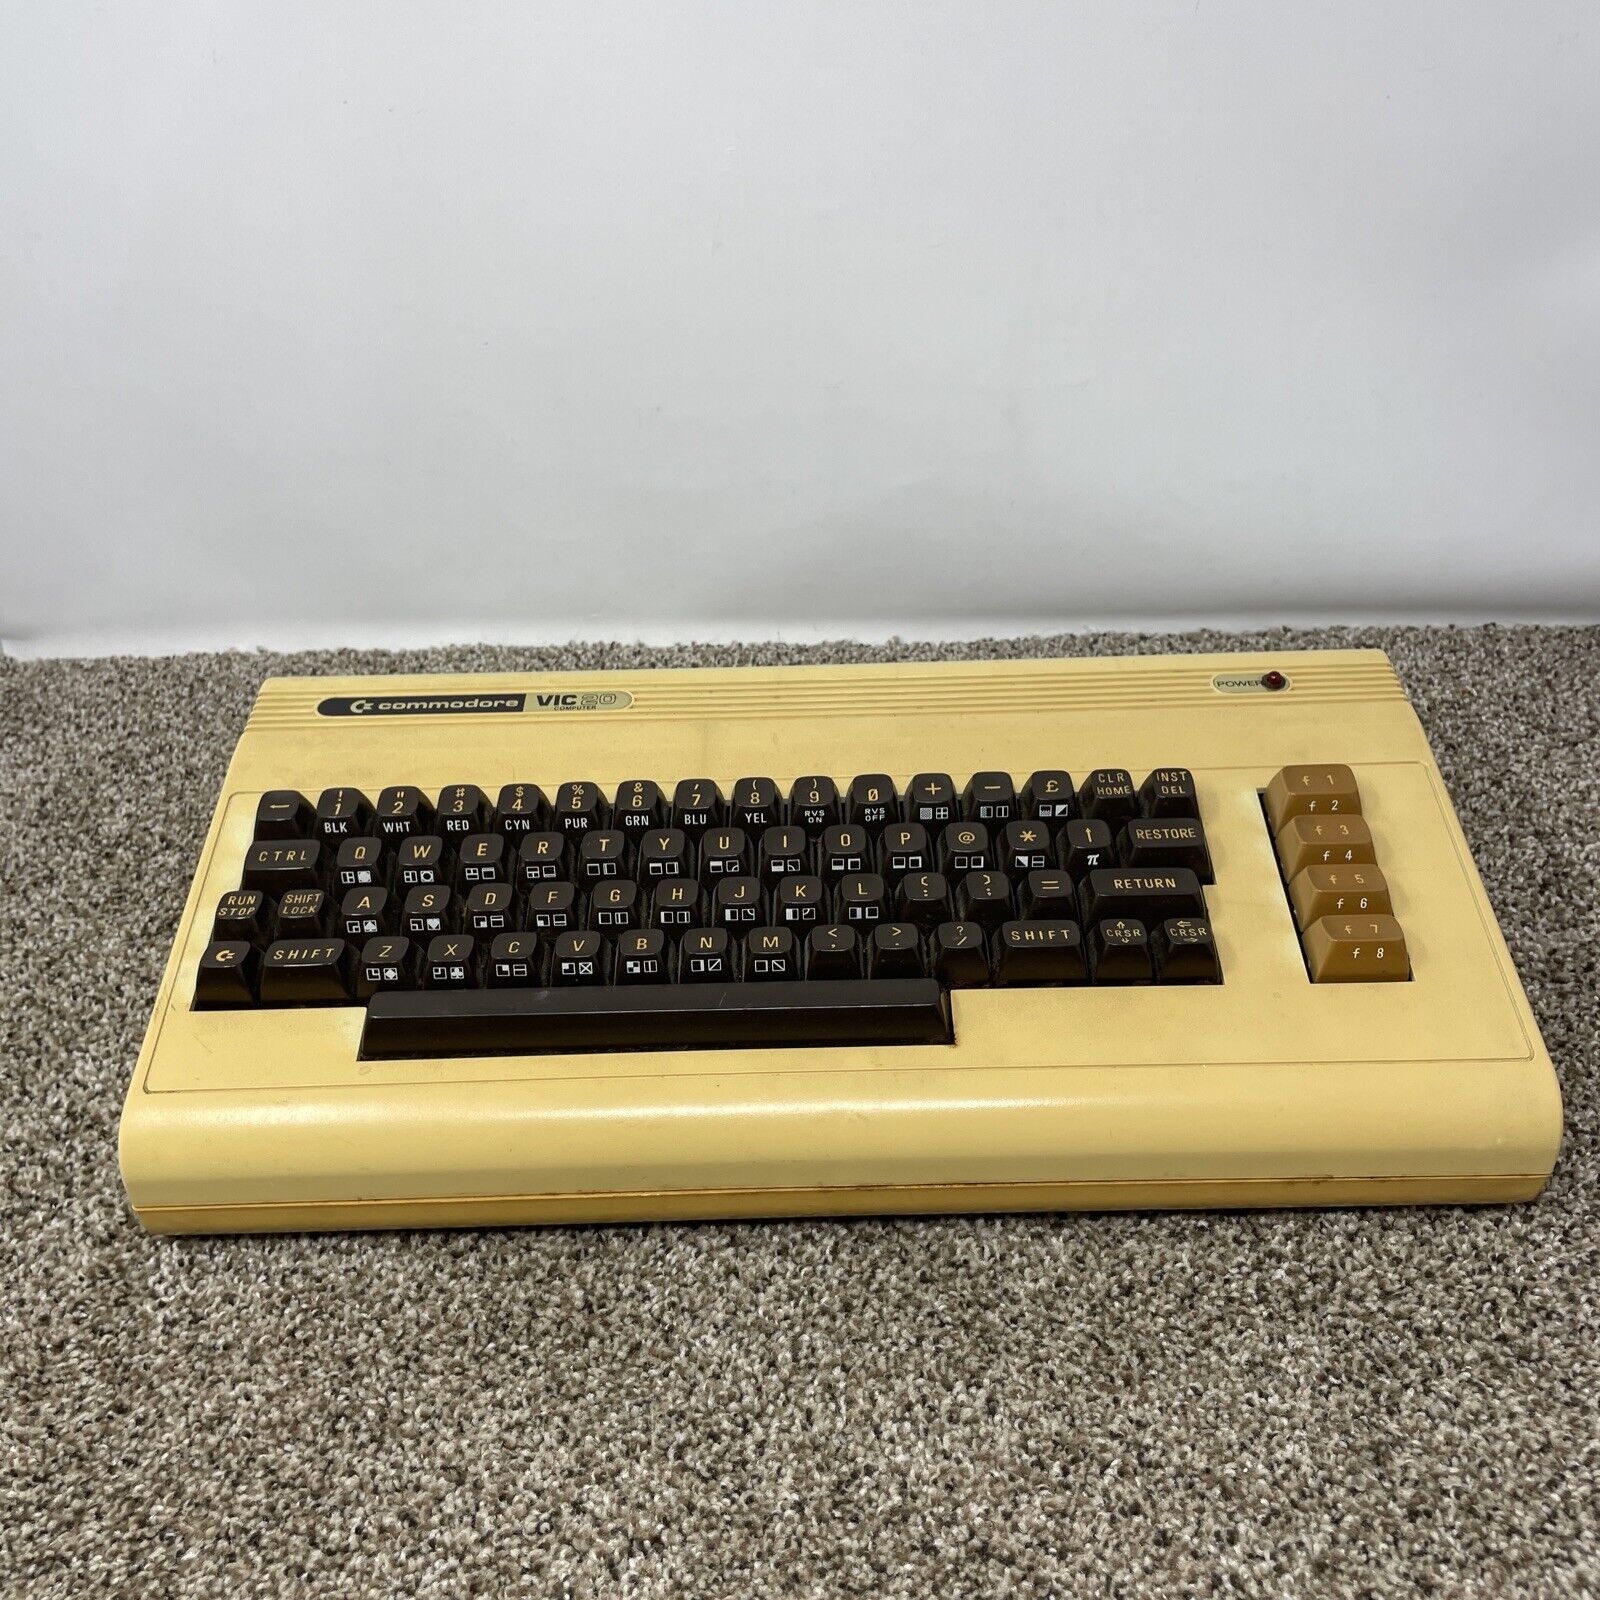 Vintage Commodore VIC 20 Computer For Parts Or Repair Read